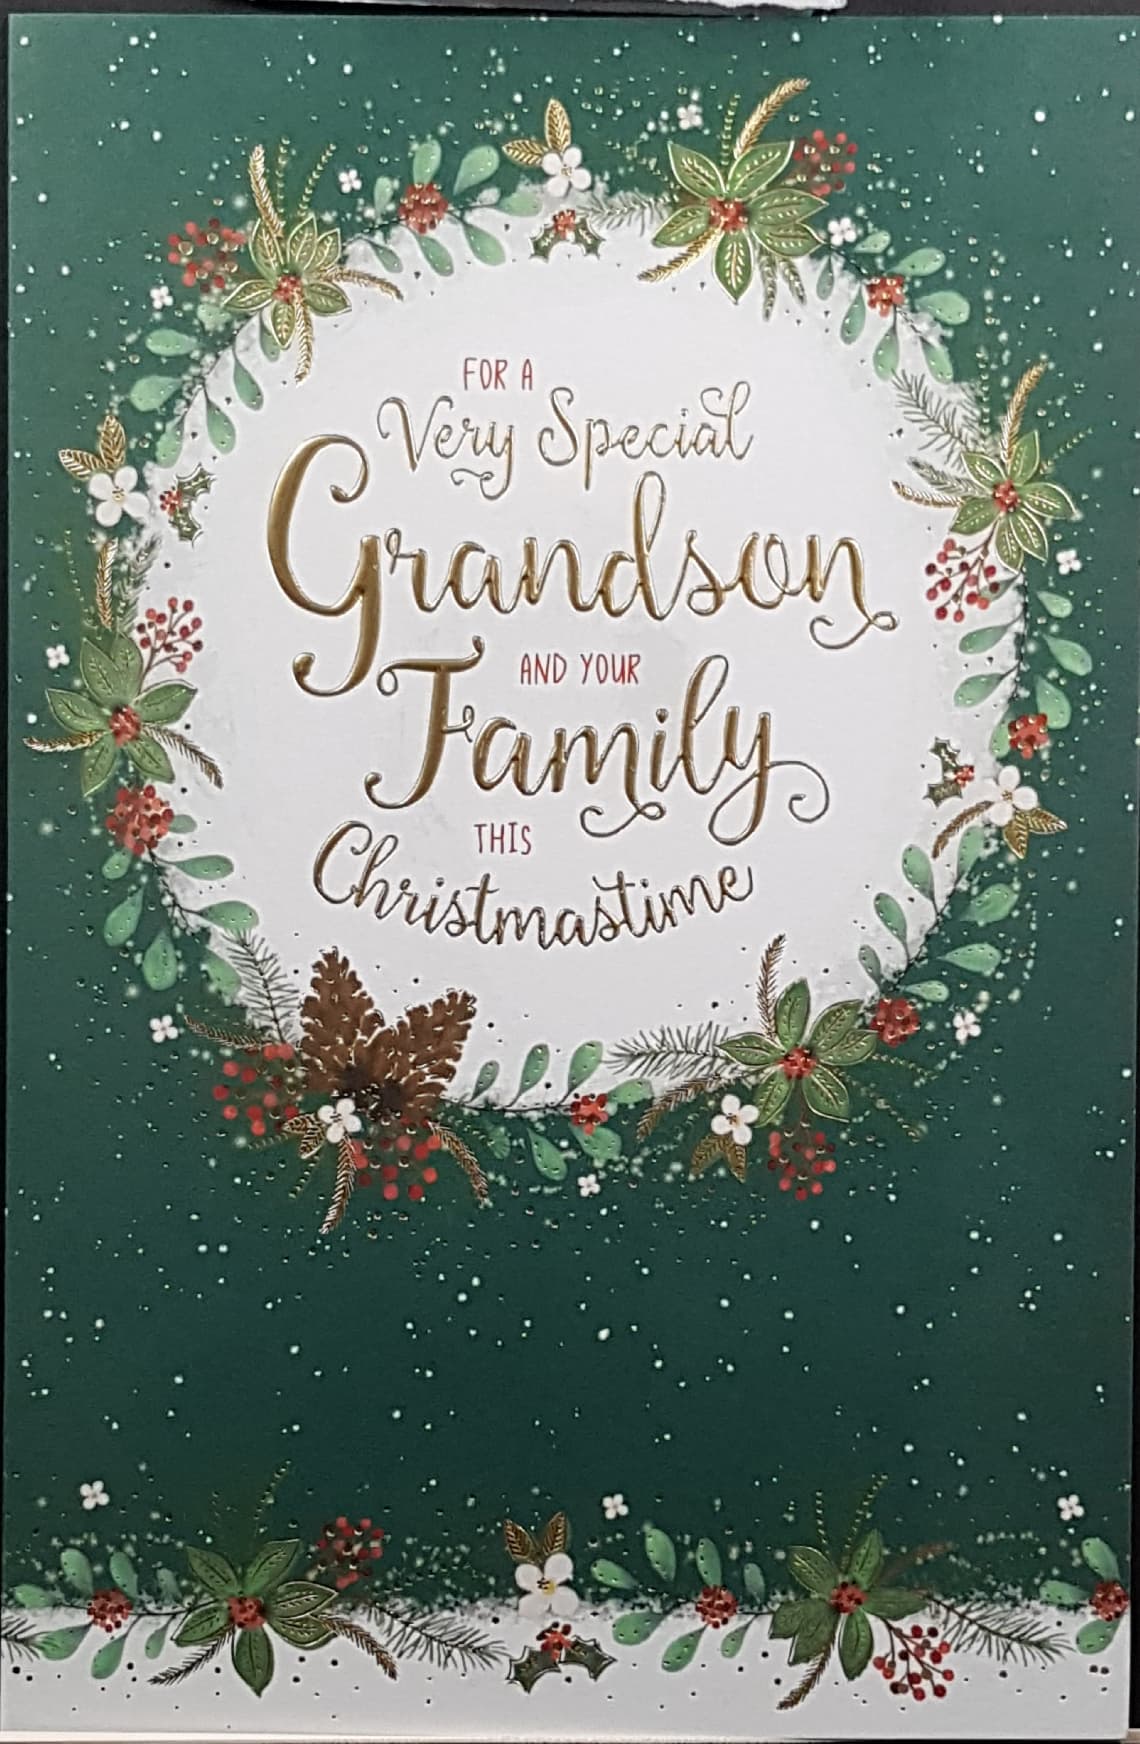 Grandson & Family Christmas Card - Wreath on Green Background & Gold Font